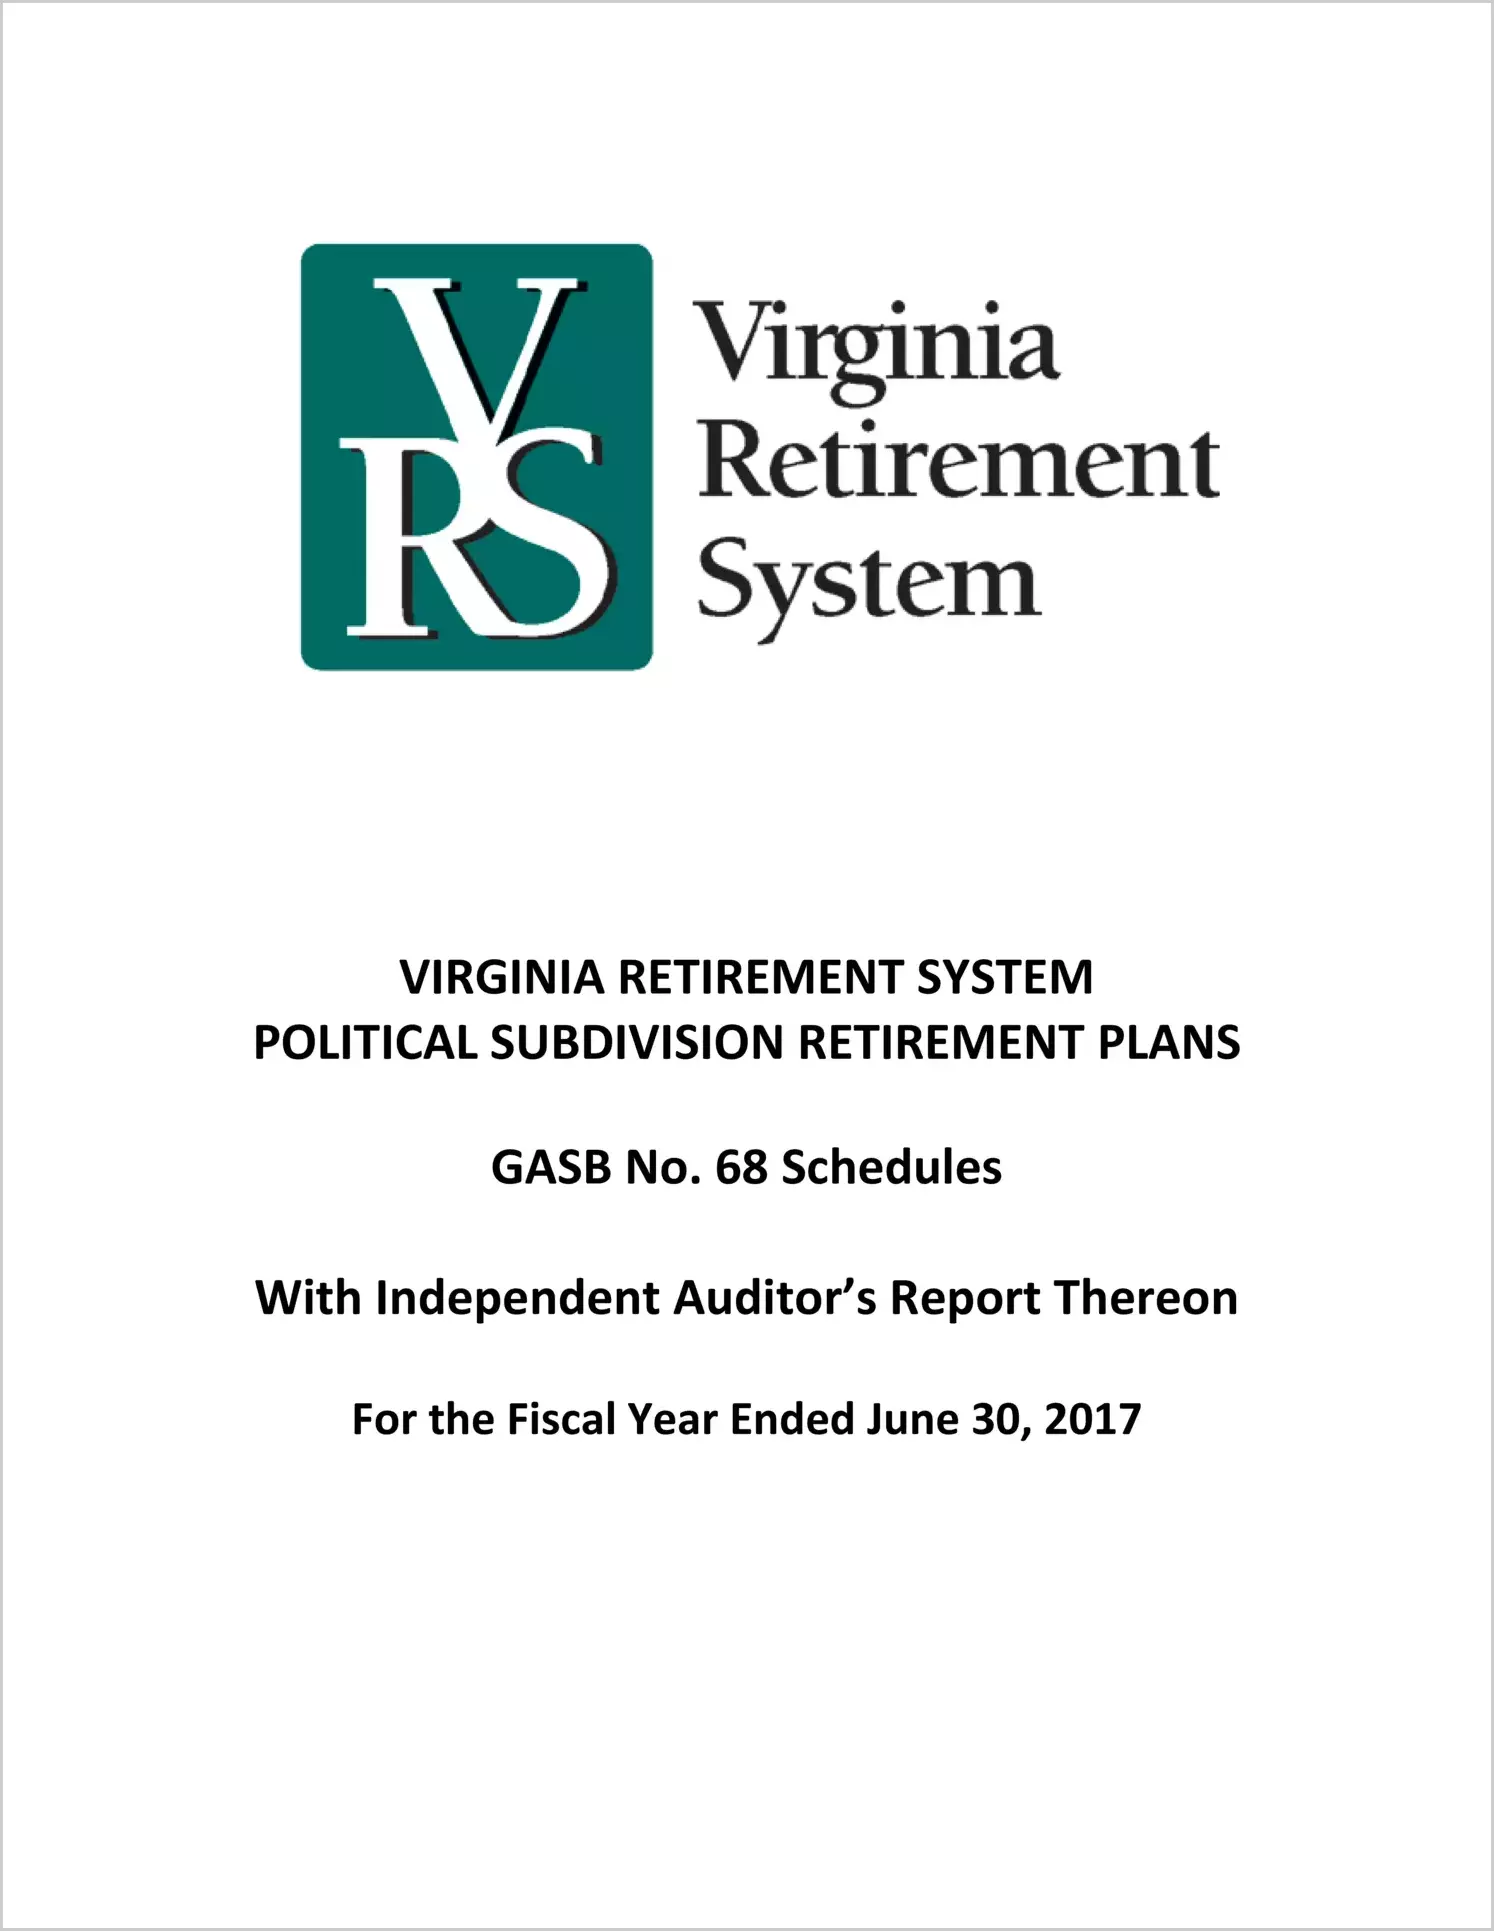 GASB 68 Schedule - Political Subdivision Retirement Plan for fiscal year June 30, 2017